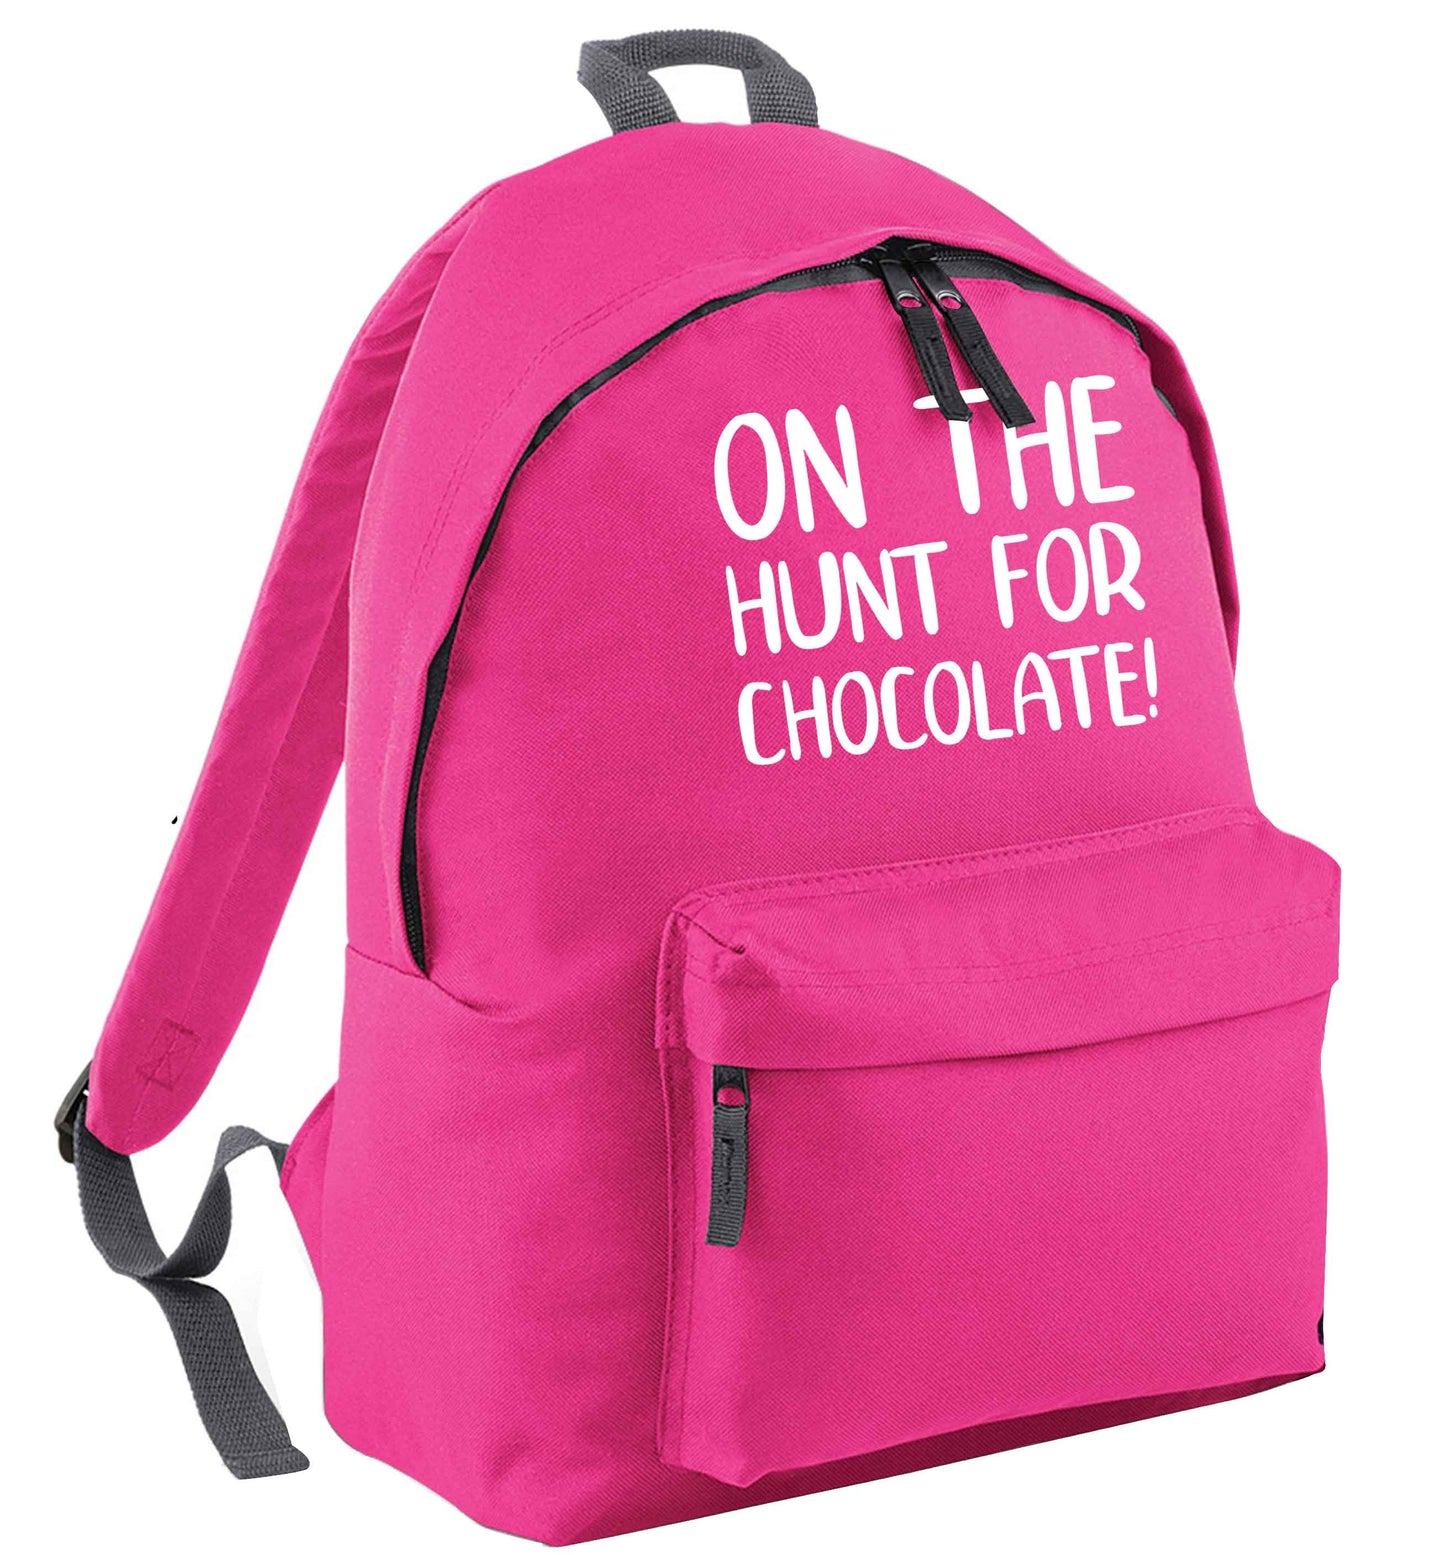 On the hunt for chocolate! | Children's backpack